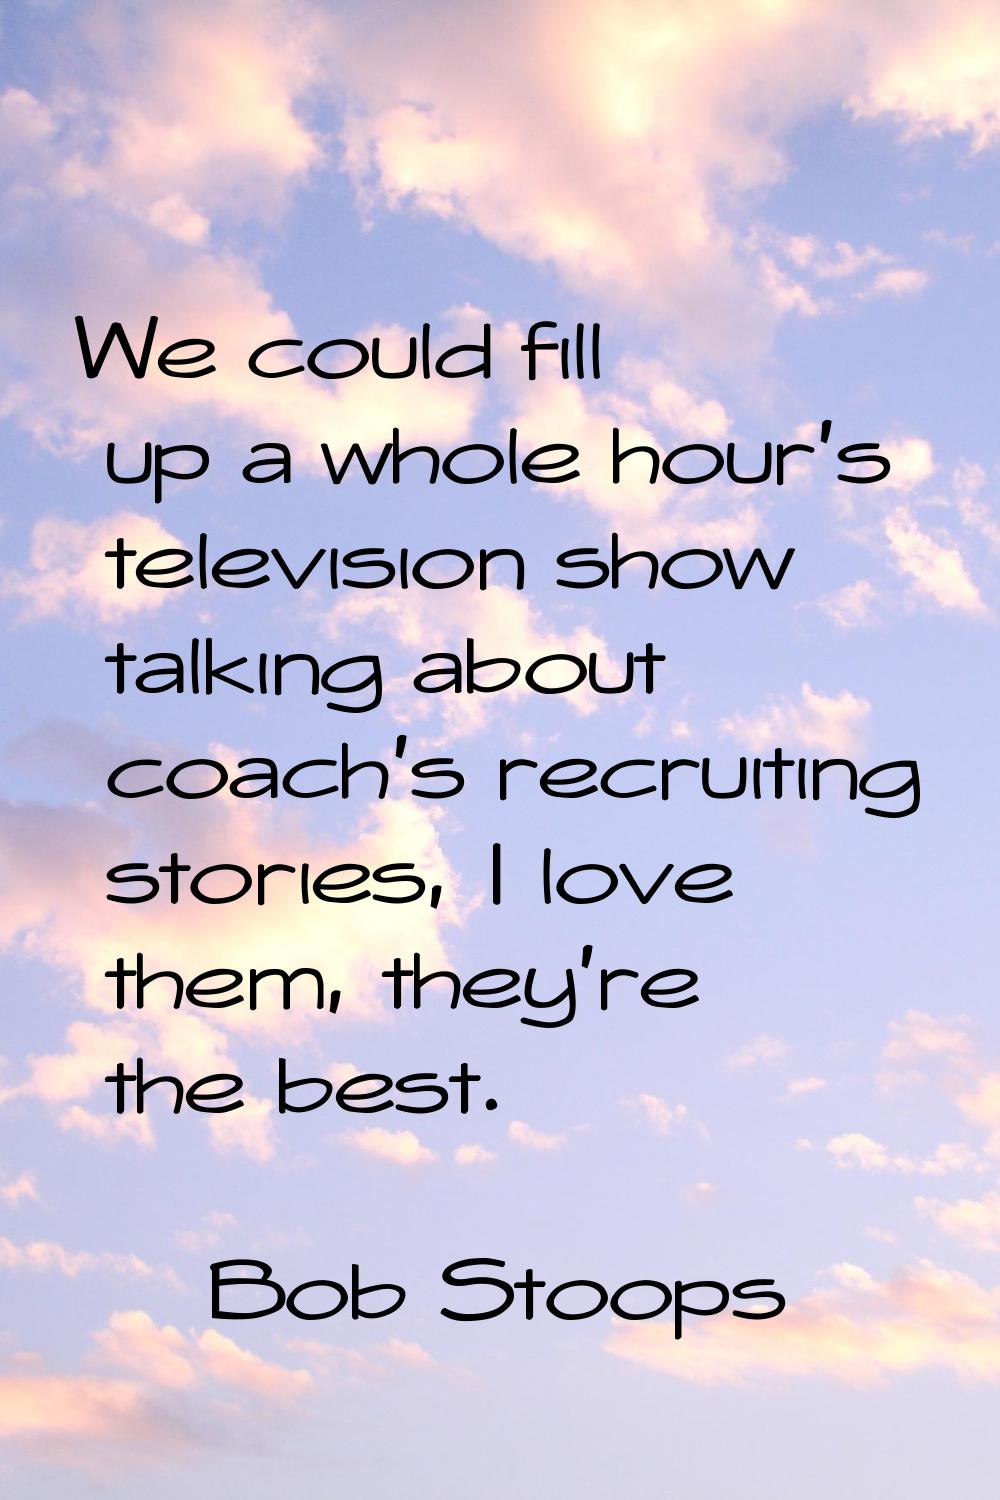 We could fill up a whole hour's television show talking about coach's recruiting stories, I love th